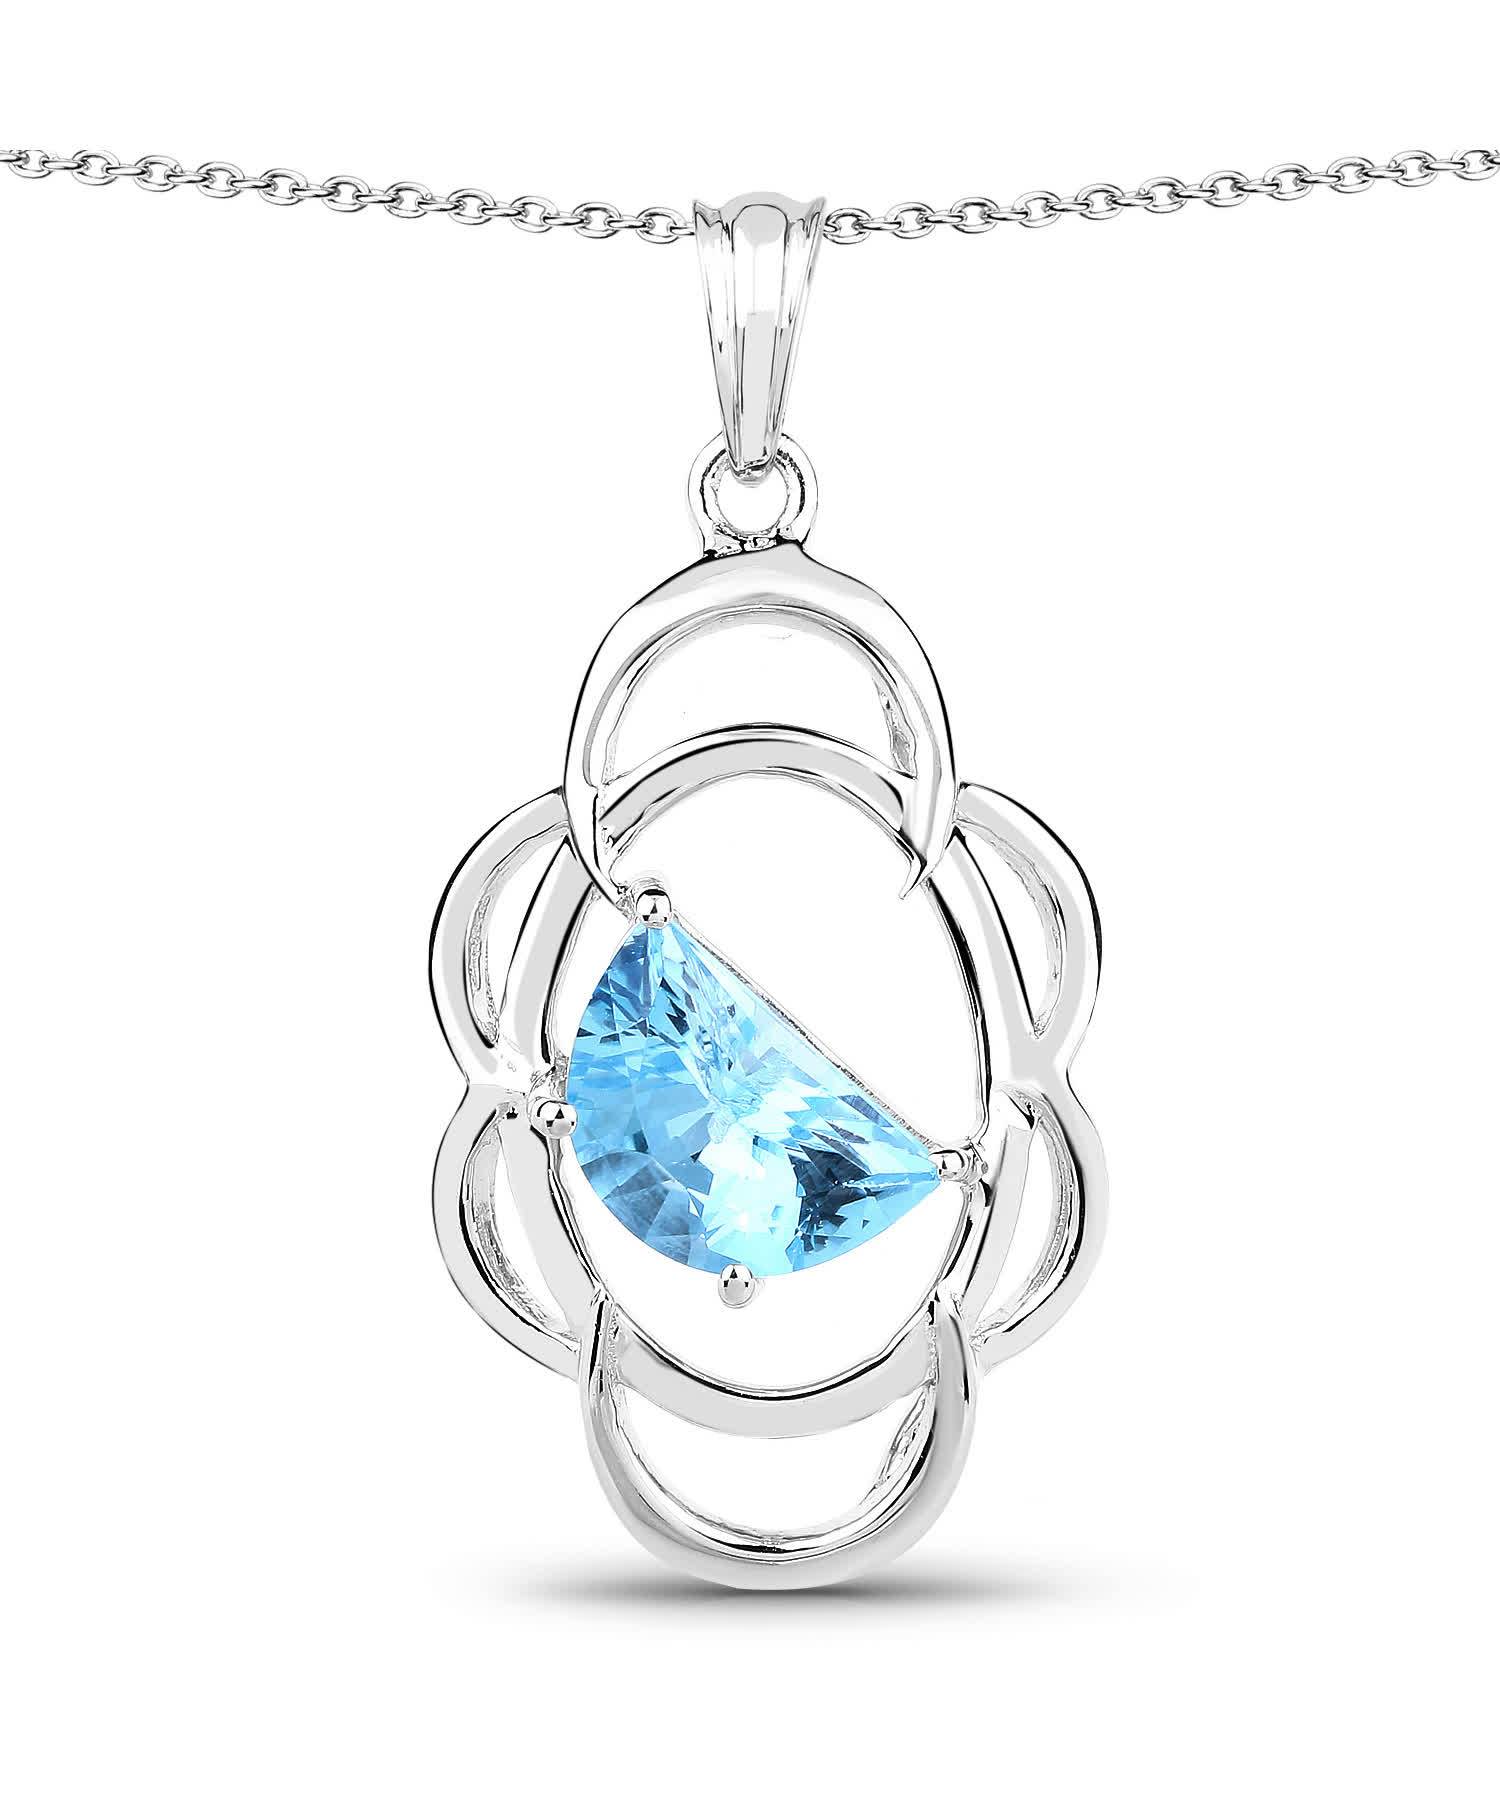 4.60ctw Natural Swiss Blue Topaz Rhodium Plated 925 Sterling Silver Pendant With Chain View 1